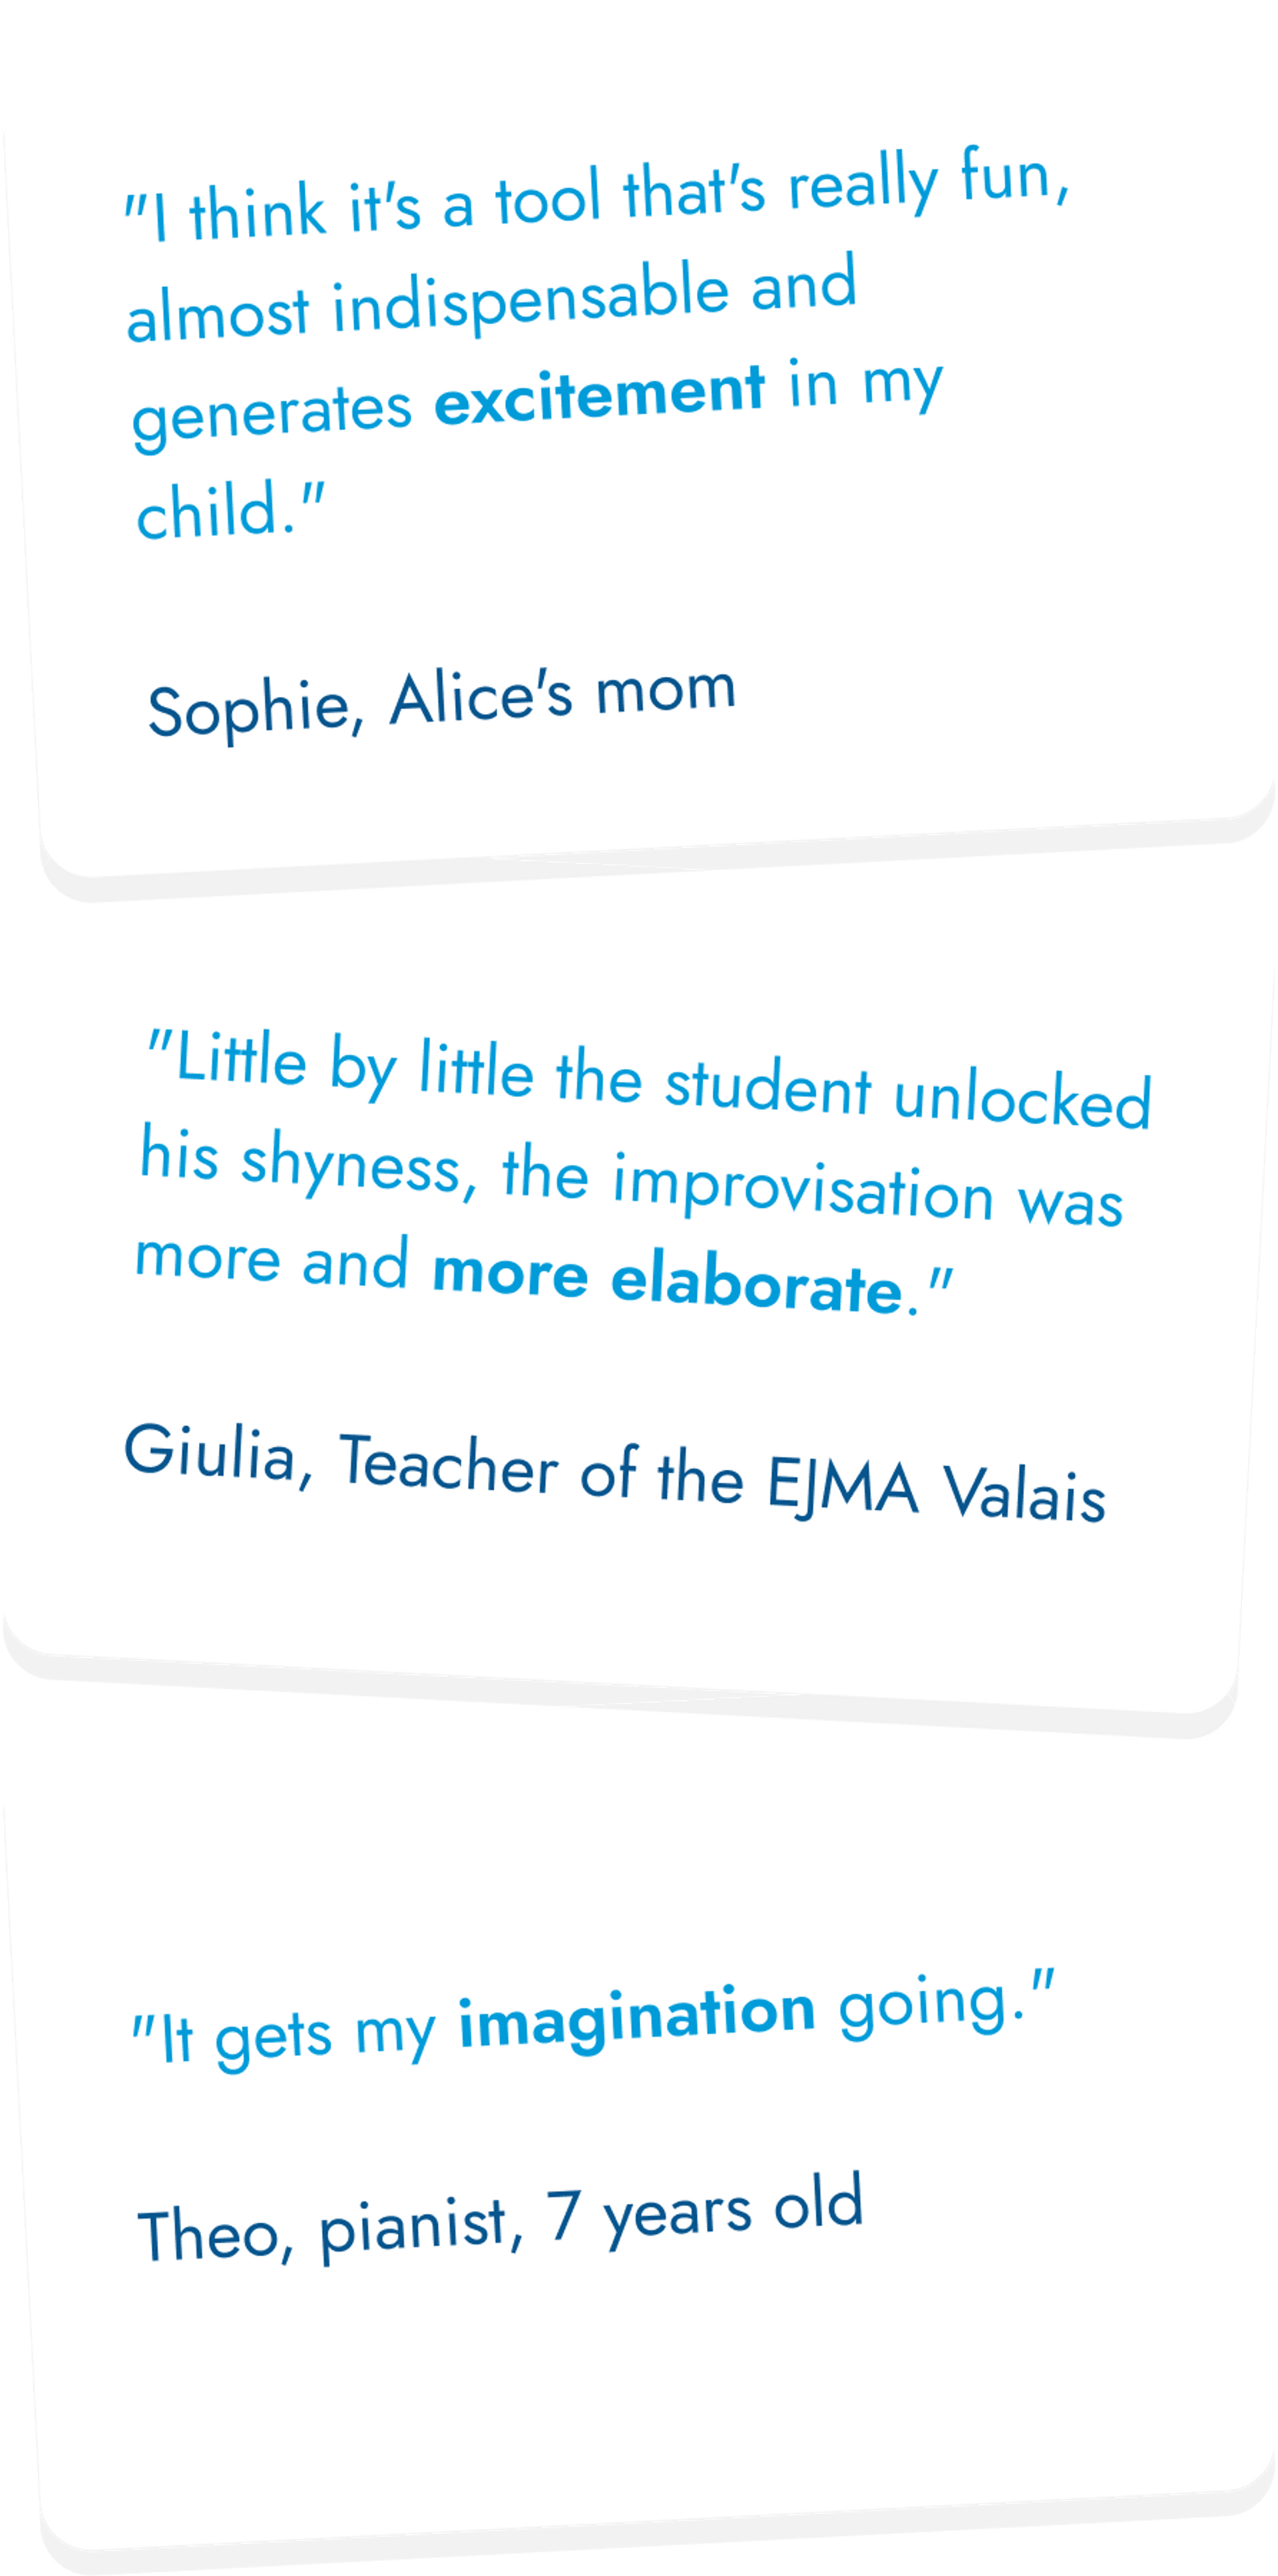 1 - "I think it's a tool that's really fun, almost indispensable and generates excitement in my child." Sophie, Alice's mom. 2 - "Little by little the student unlocked his shyness, the improvisation was more and more elaborate." Giulia, Teacher of the EJMA Valais. 3 - "It gets my imagination going." Theo, pianist, 7 years old.